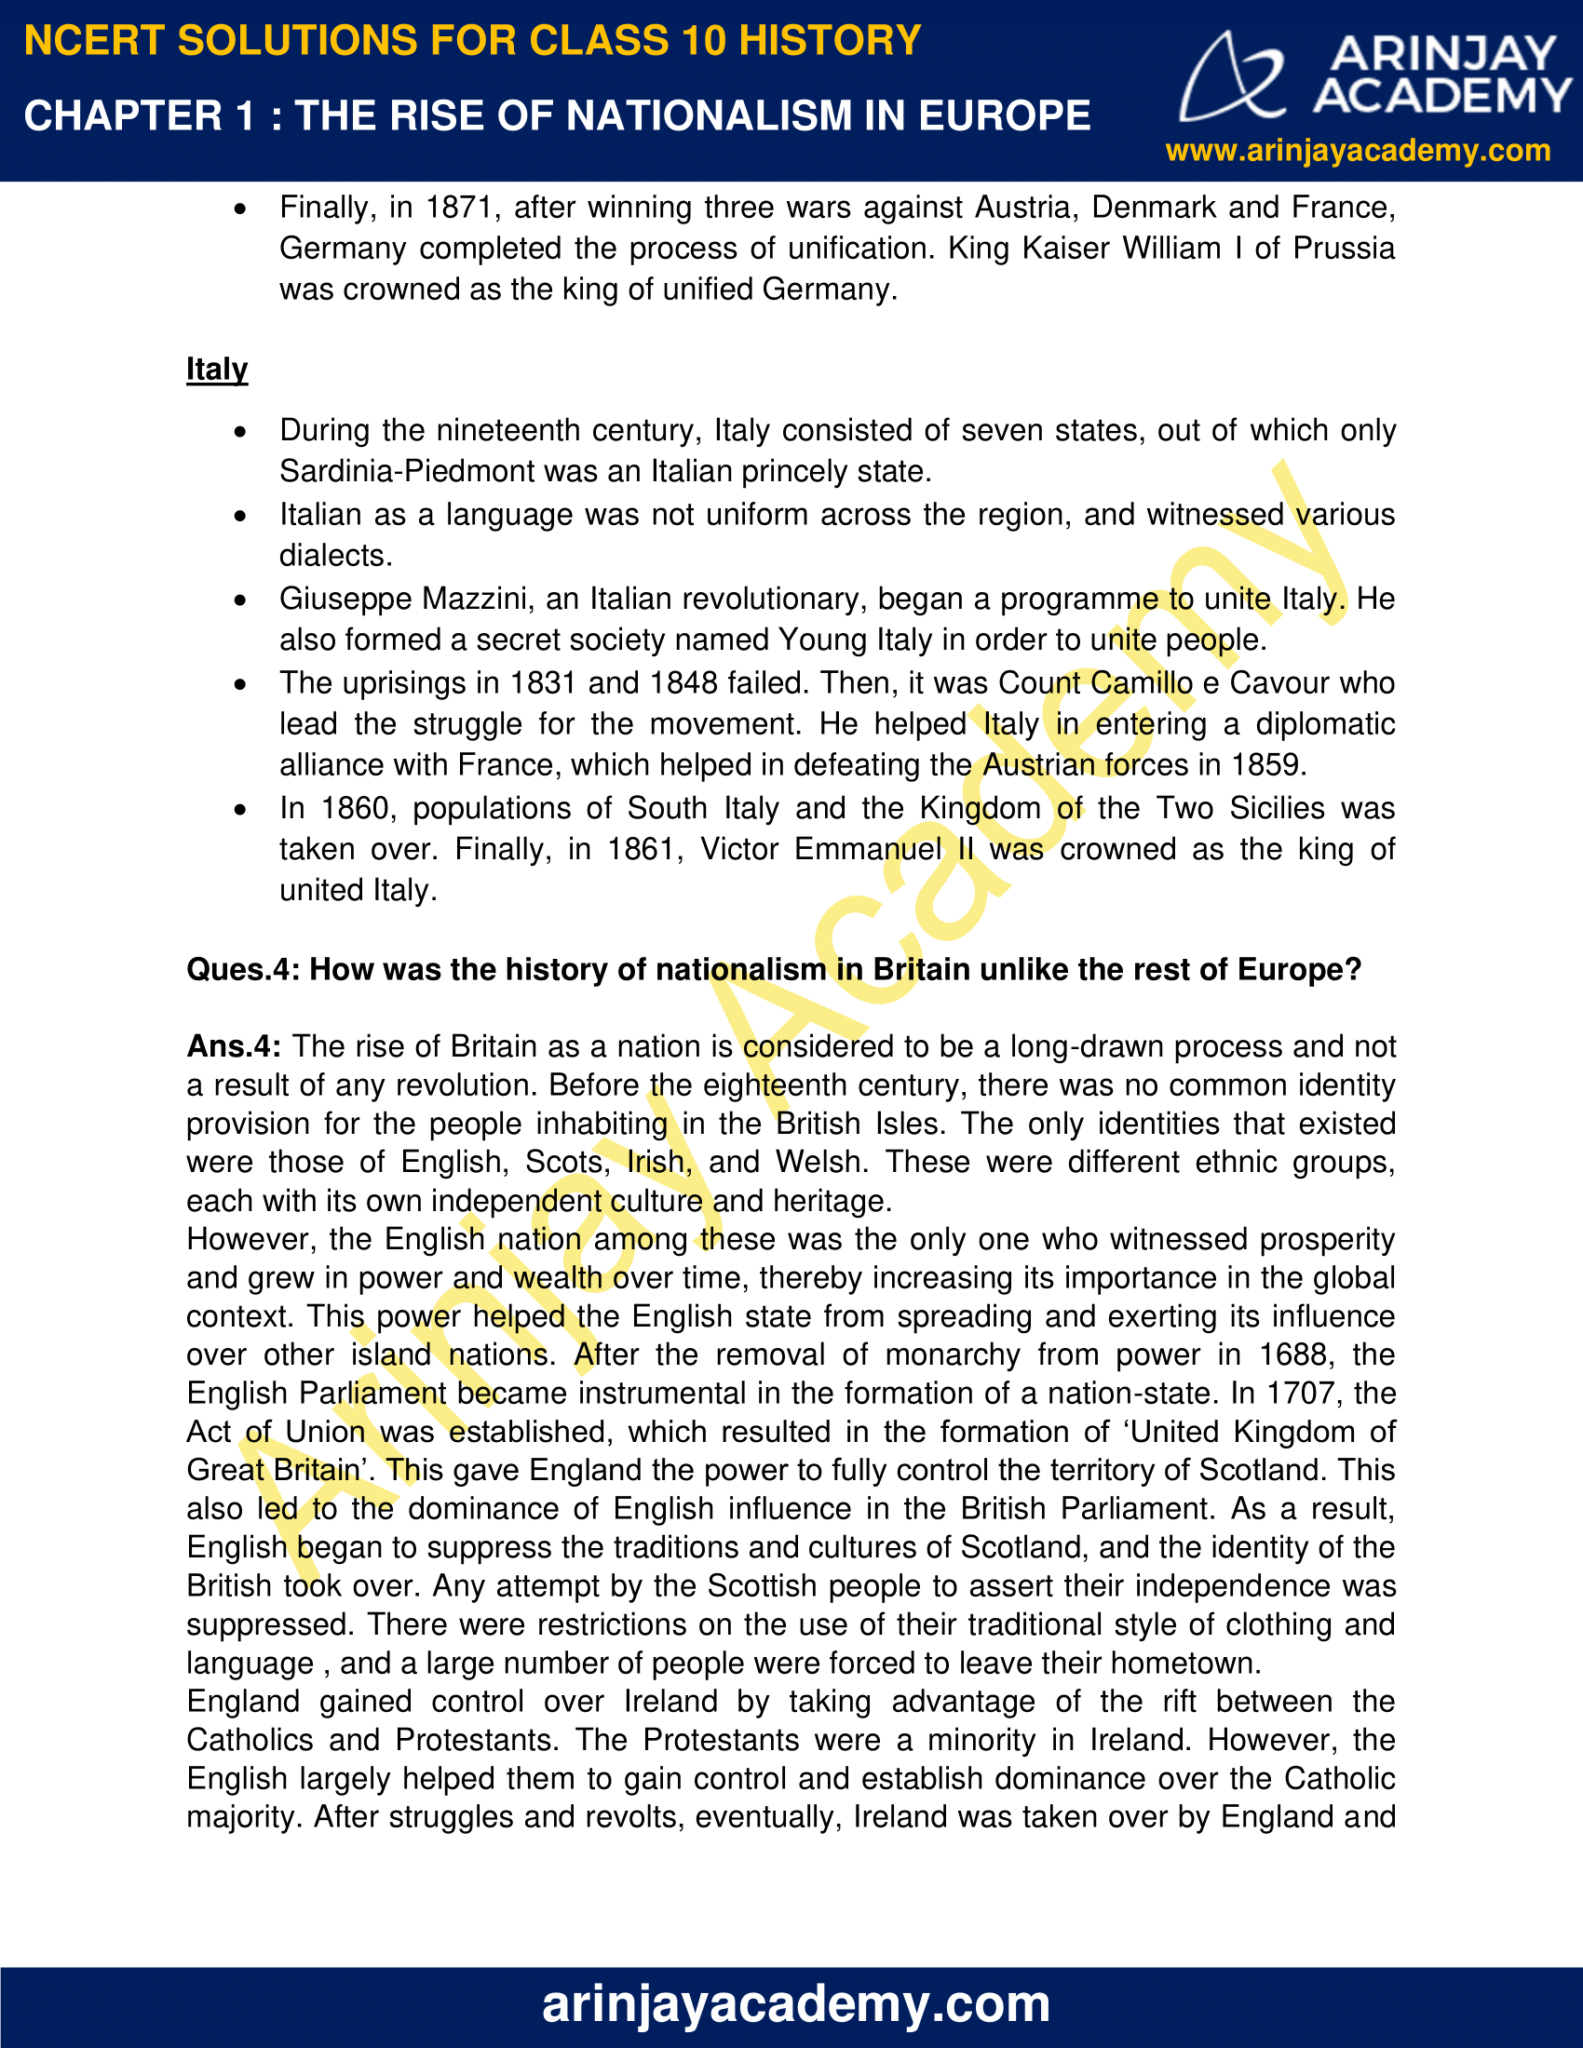 ncert class 10 history chapter 1 case study questions